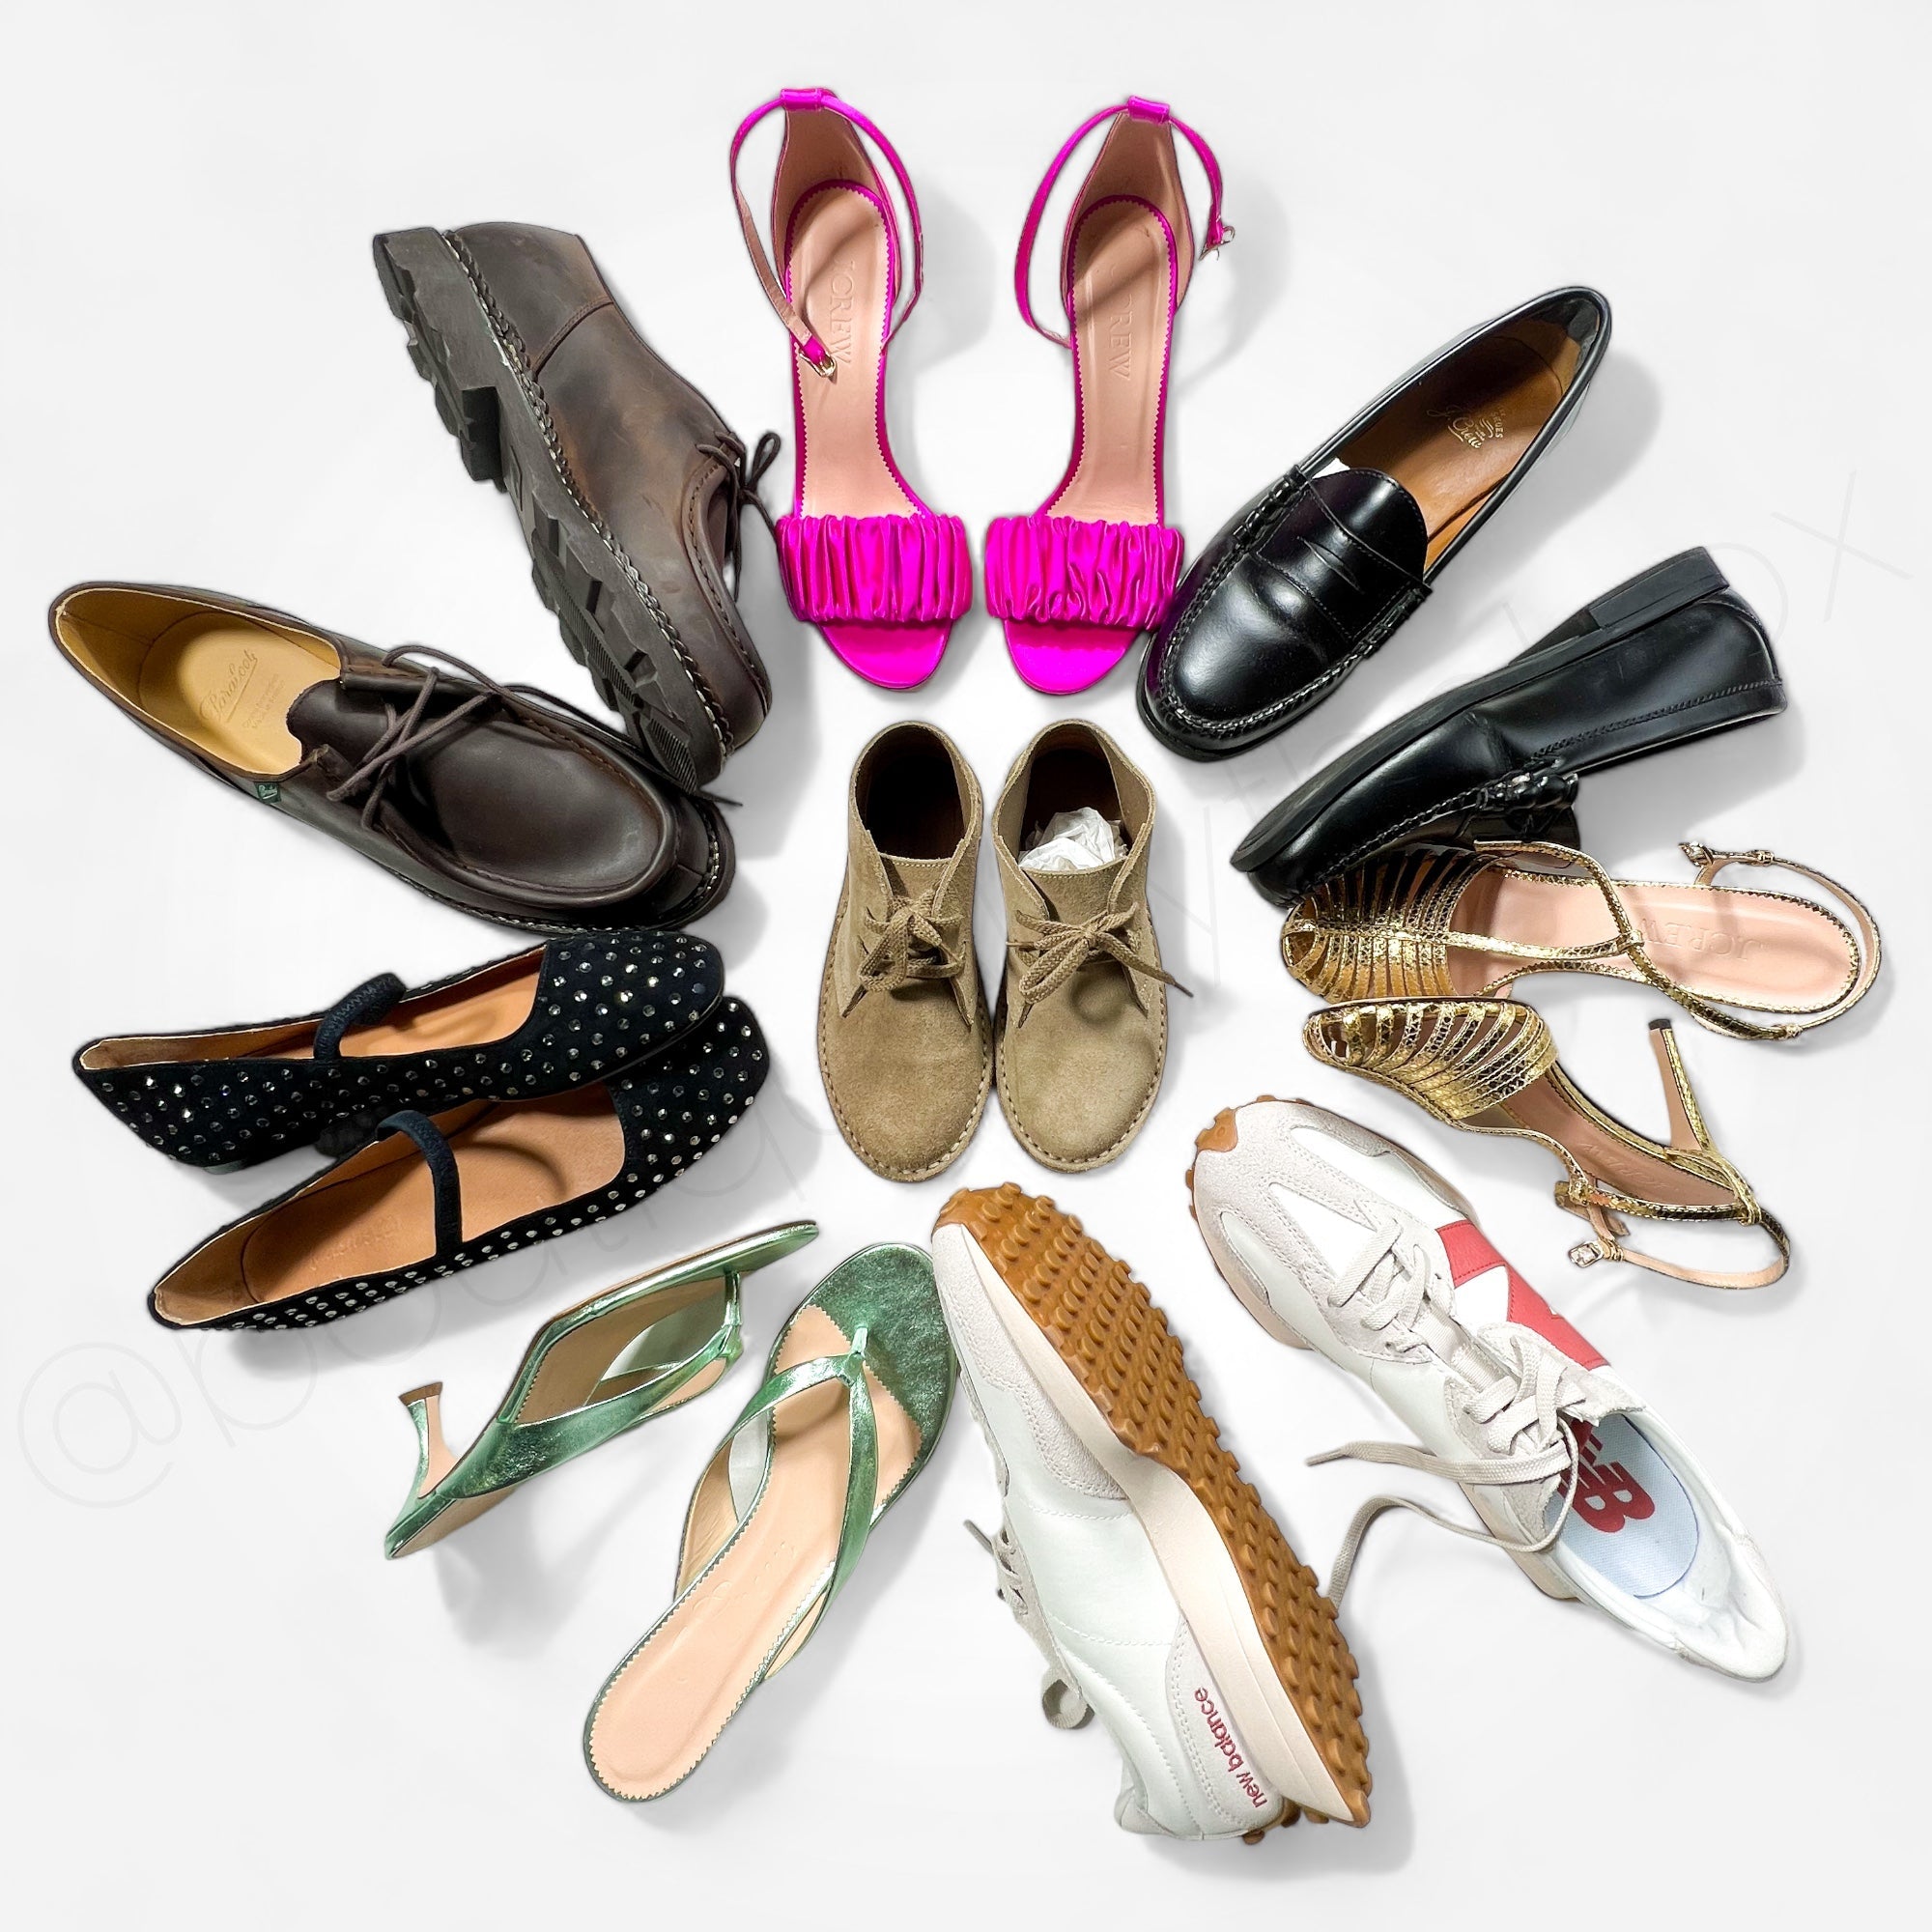 MDWLL + JCRW Footwear New/Returns Men's & Women's Wholesale - Boutique by the Box Wholesale for Resellers